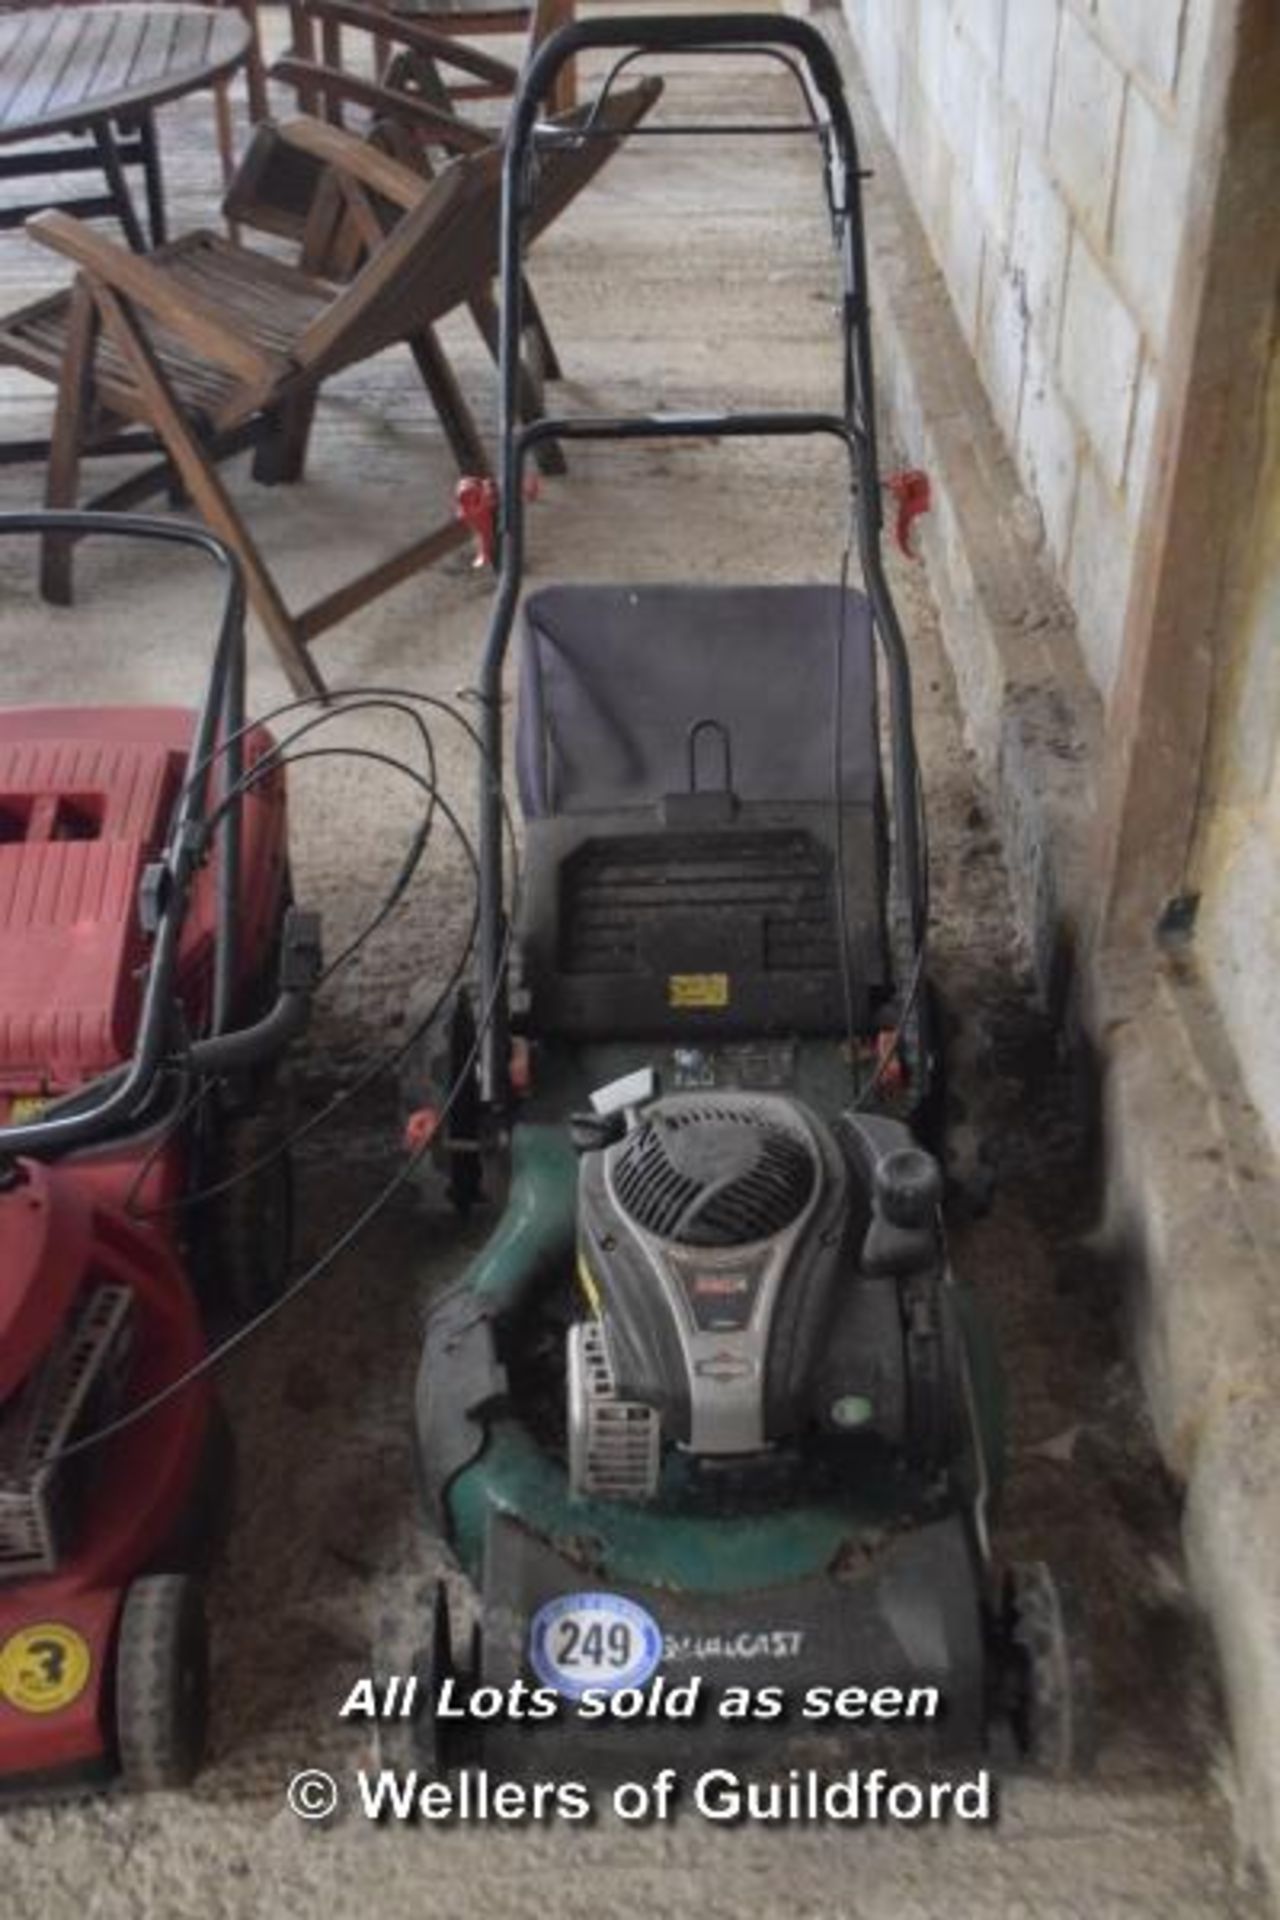 QUALCAST MOWER WITH BRIGGS AND STRATTON 550 SERIES 140CC ENGINE [LOCATION: HOMESTEAD FARM - CALL THE